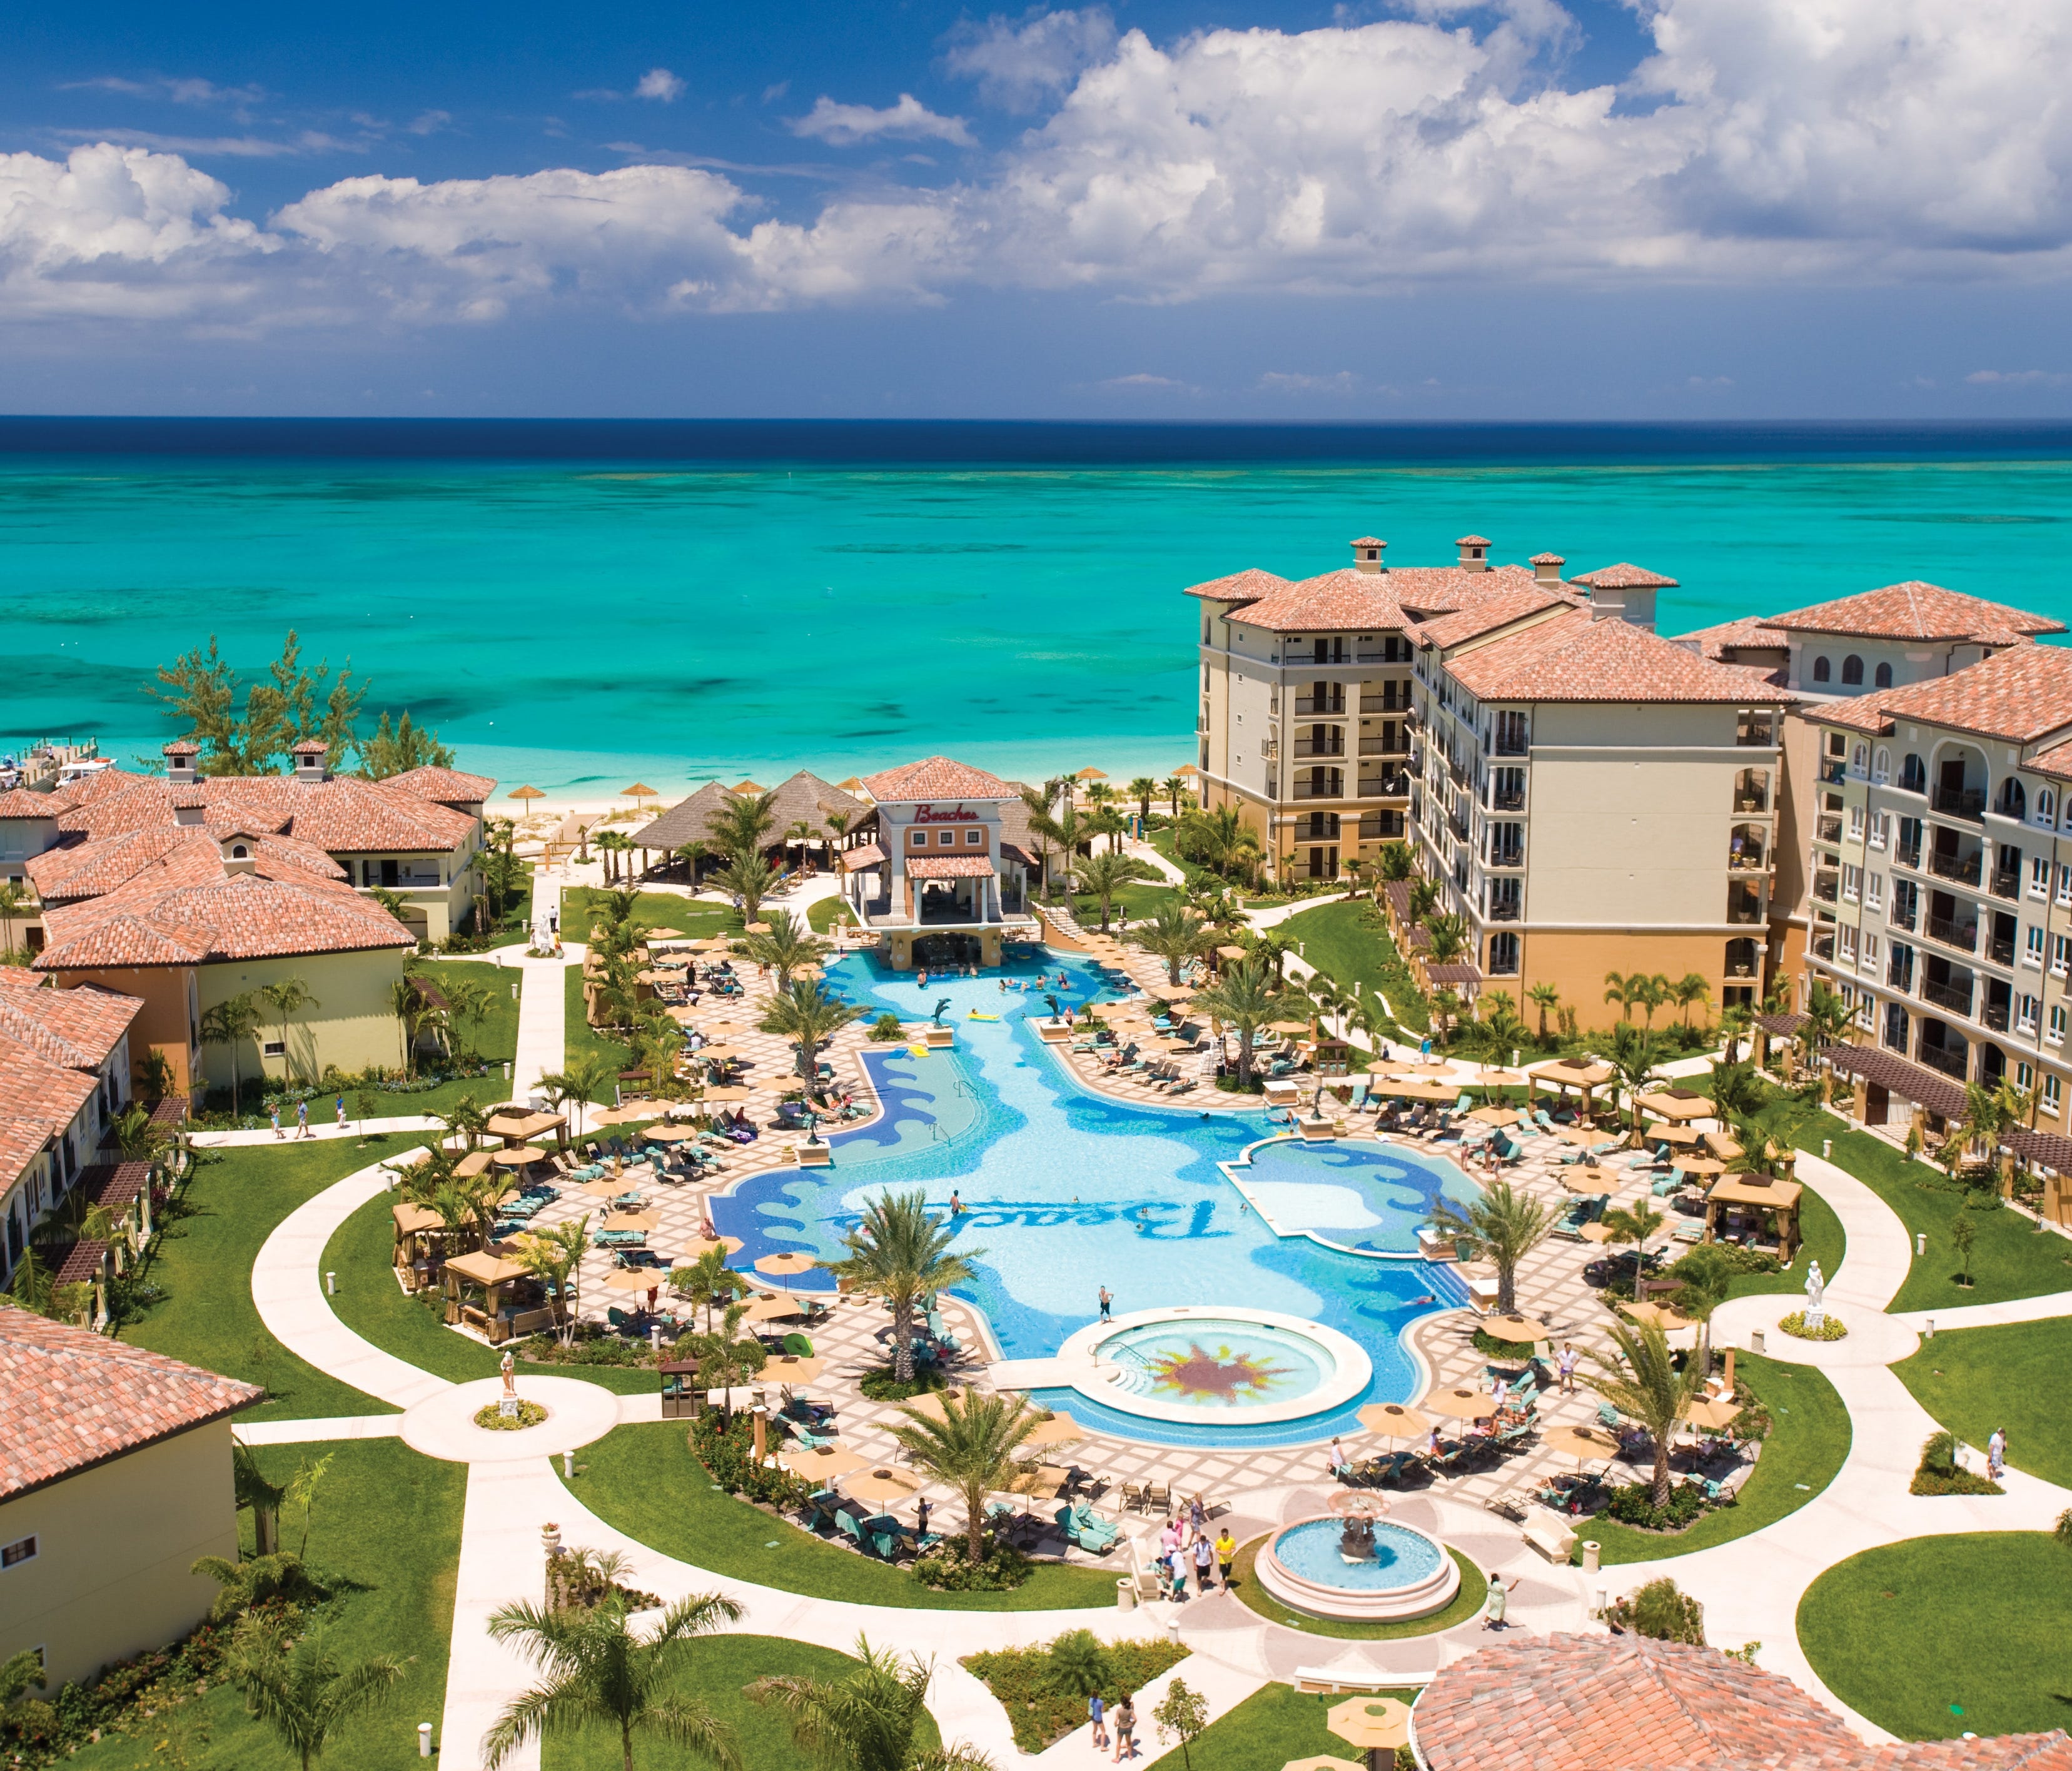 The Beaches Turks and Caicos resort.